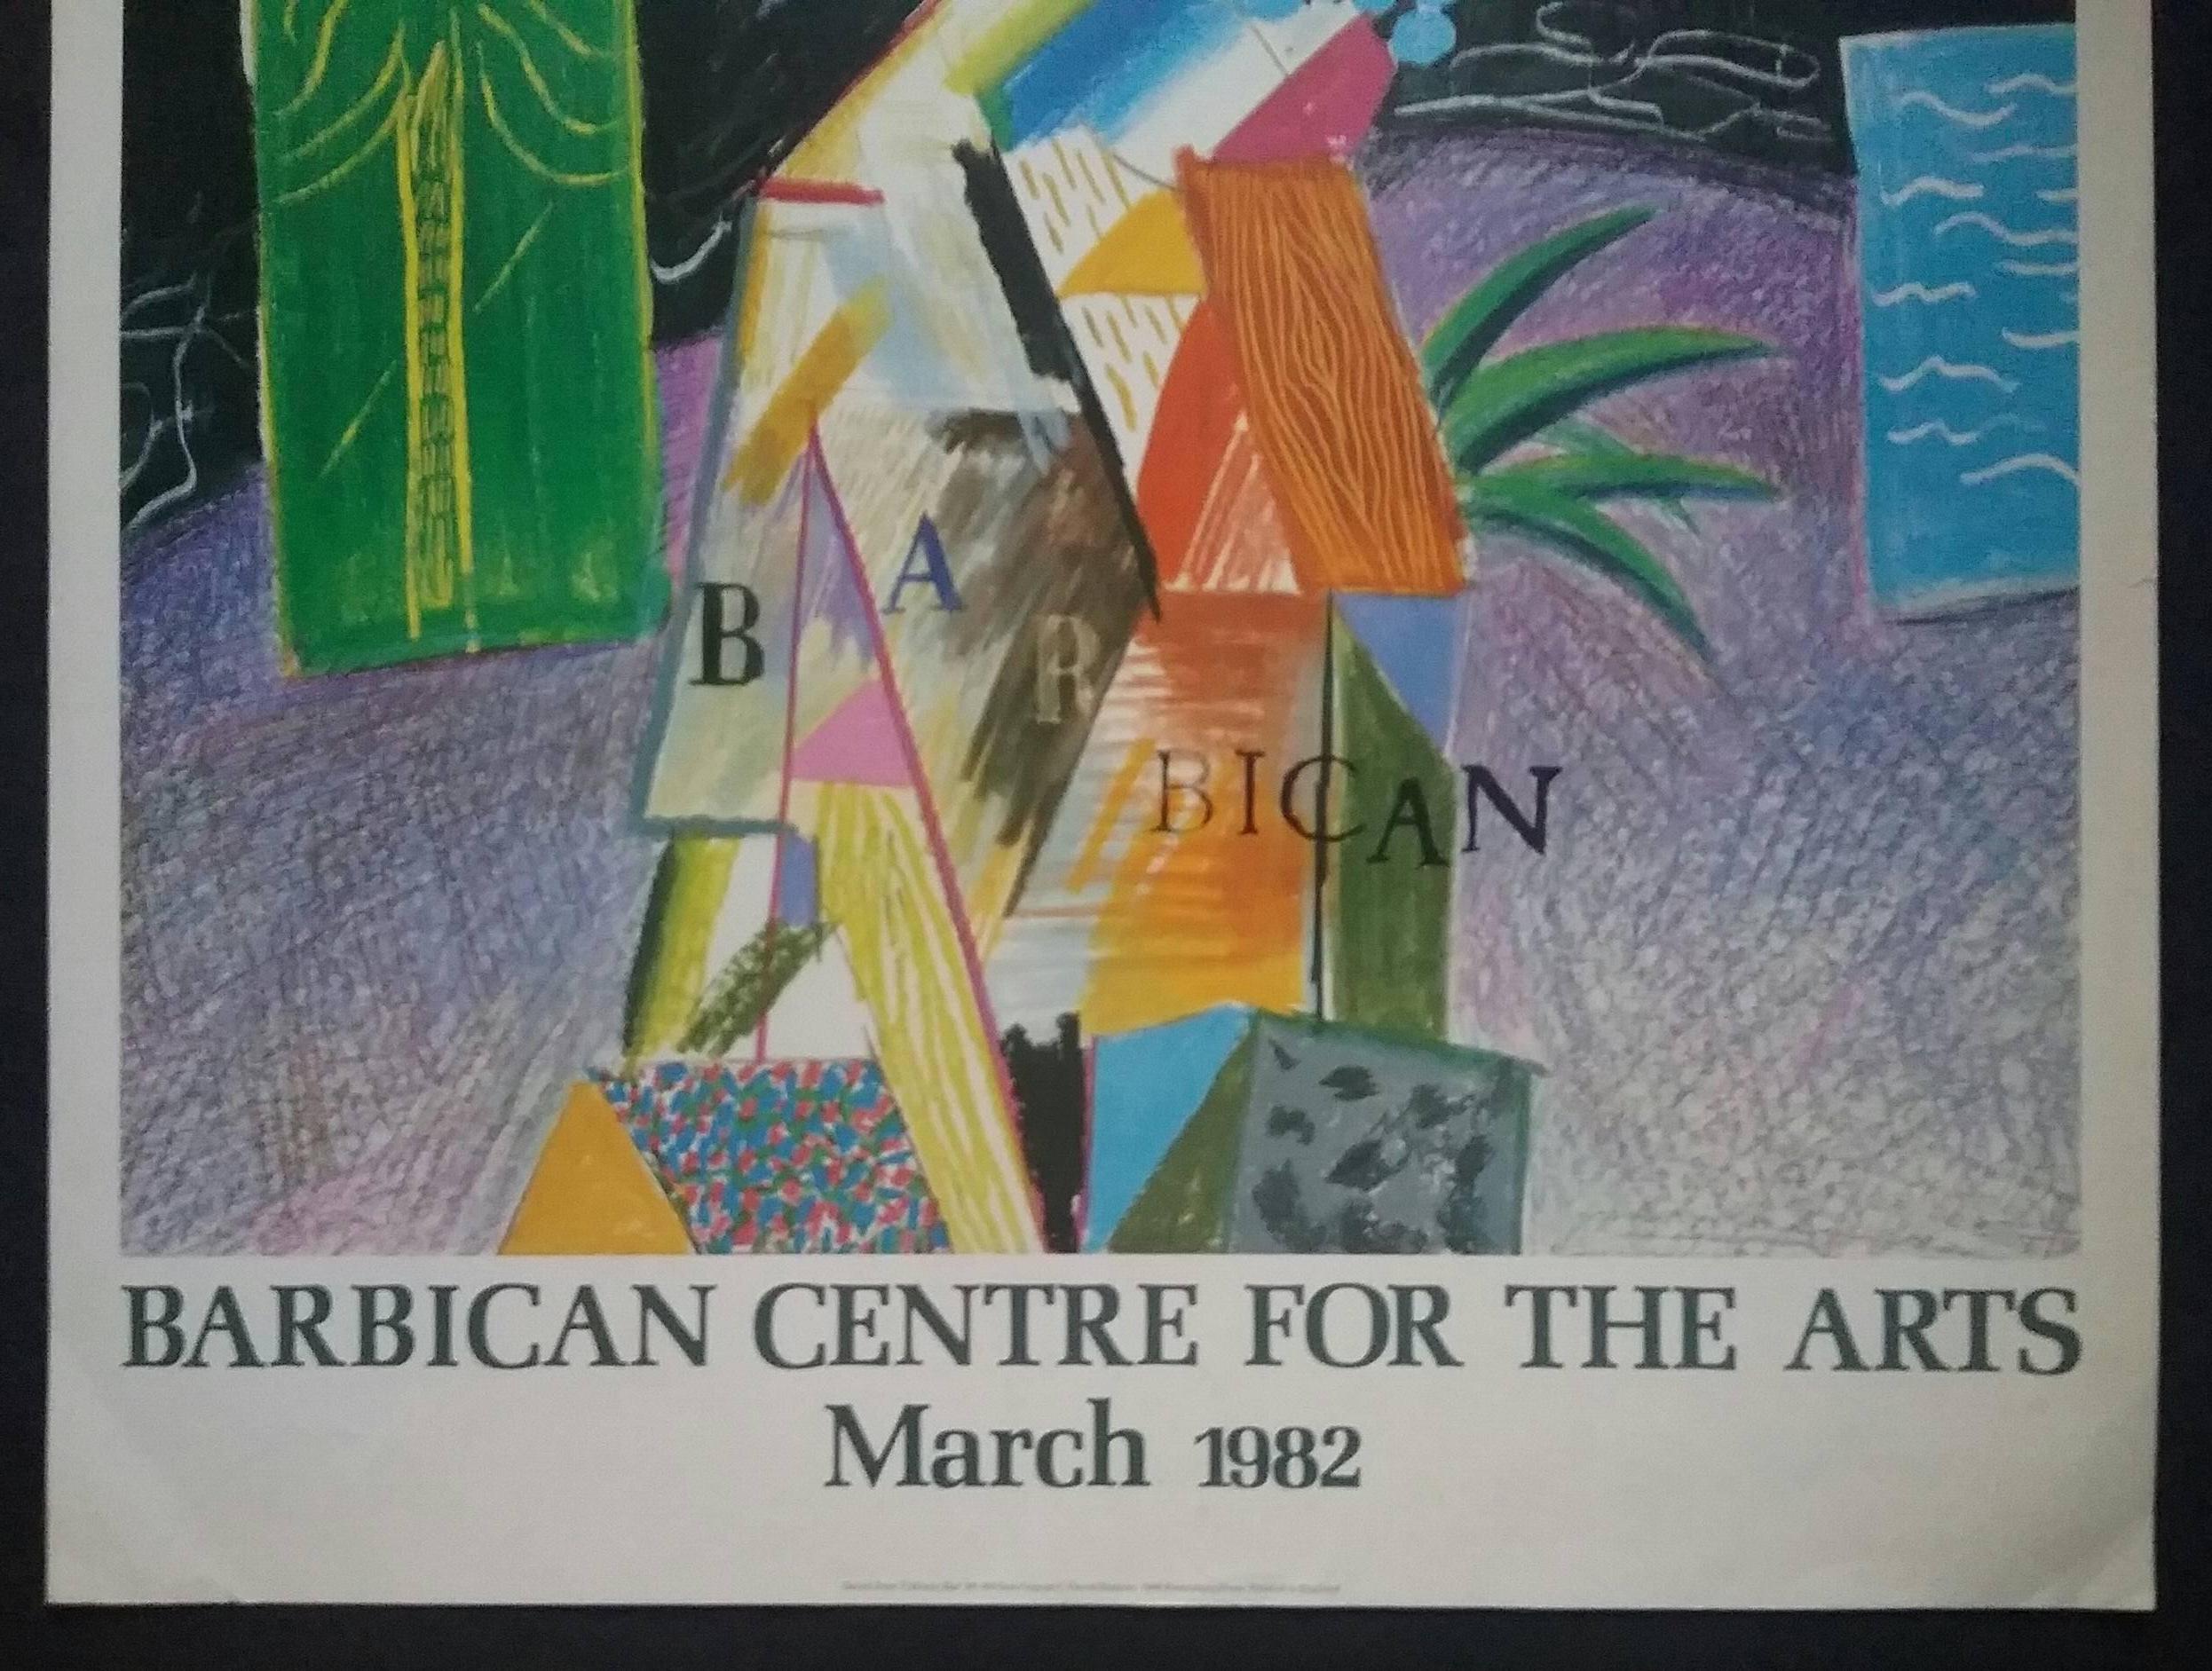 City Of London.  Barbican Centre For The Arts.  March 1982. - Gray Figurative Print by (after) David Hockney